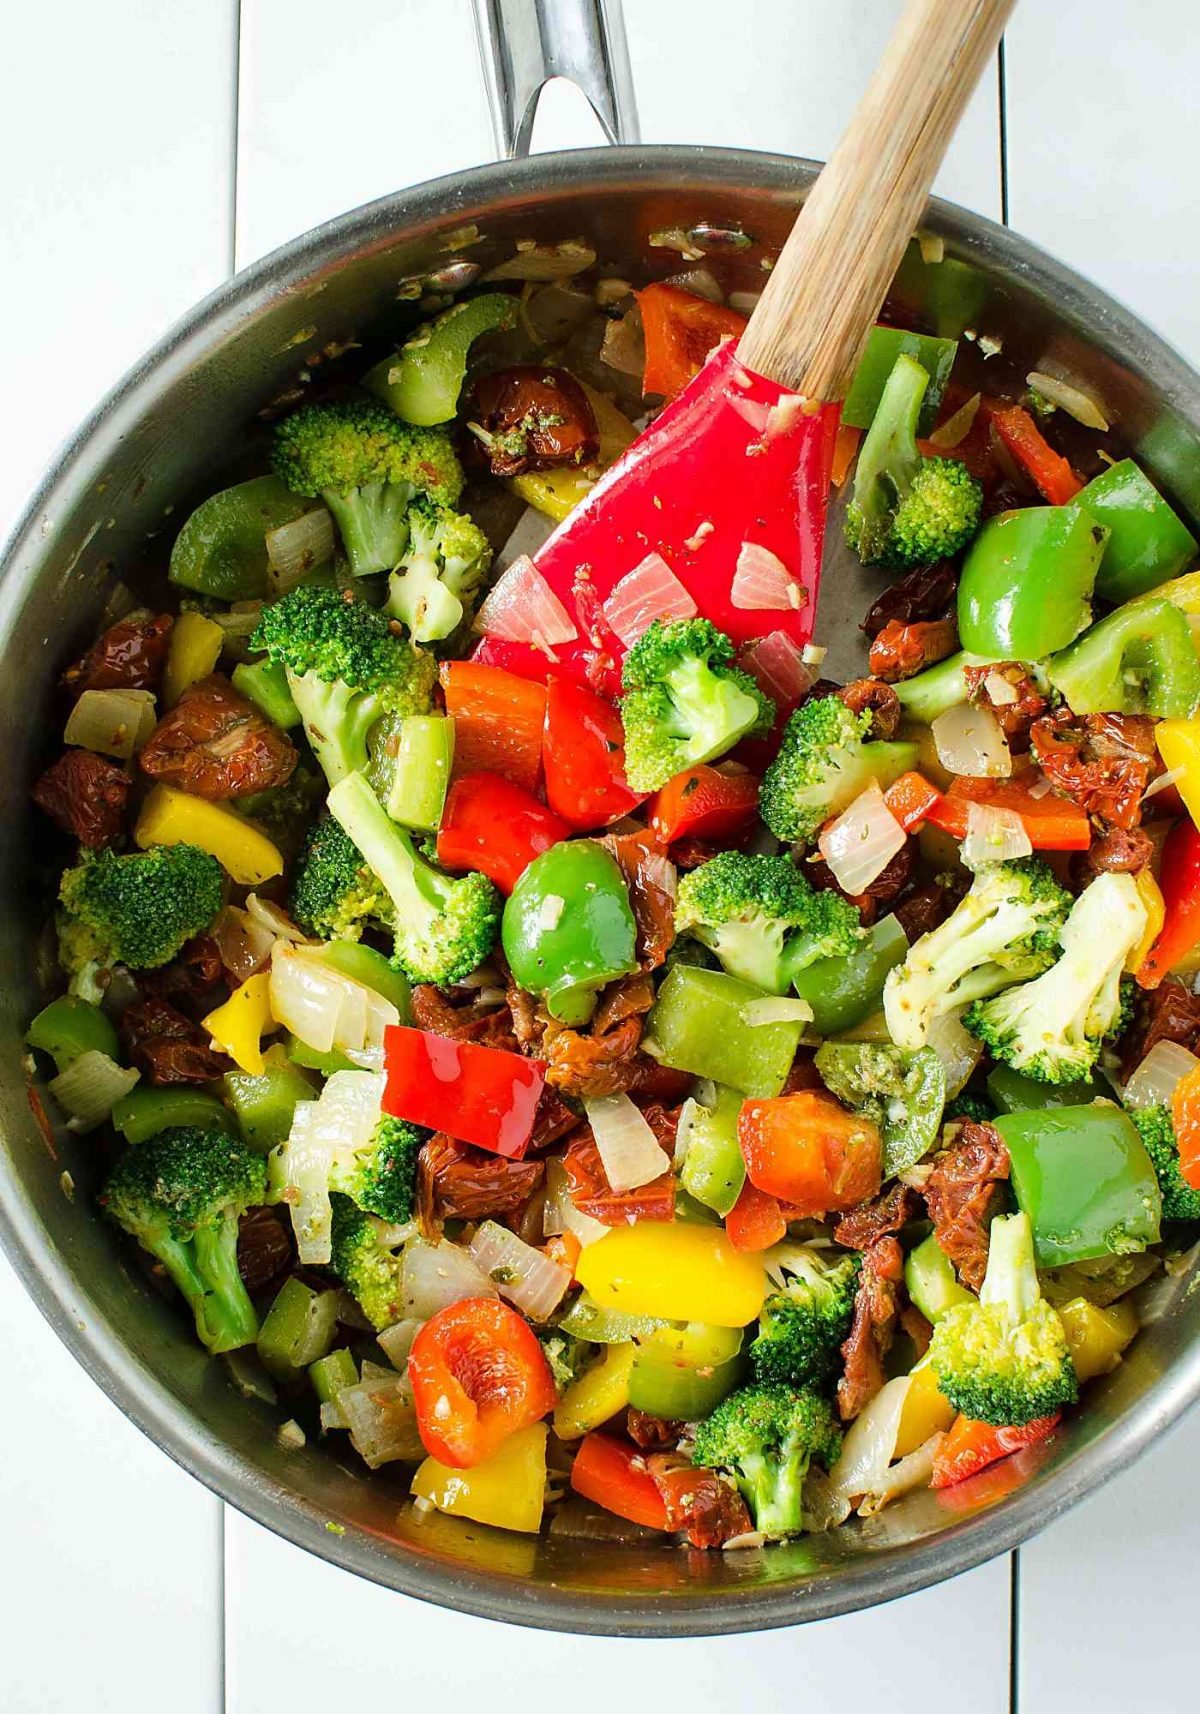 Turn fresh vegetables into this simple, quick yet delicious and awesome stir-fry veggies.